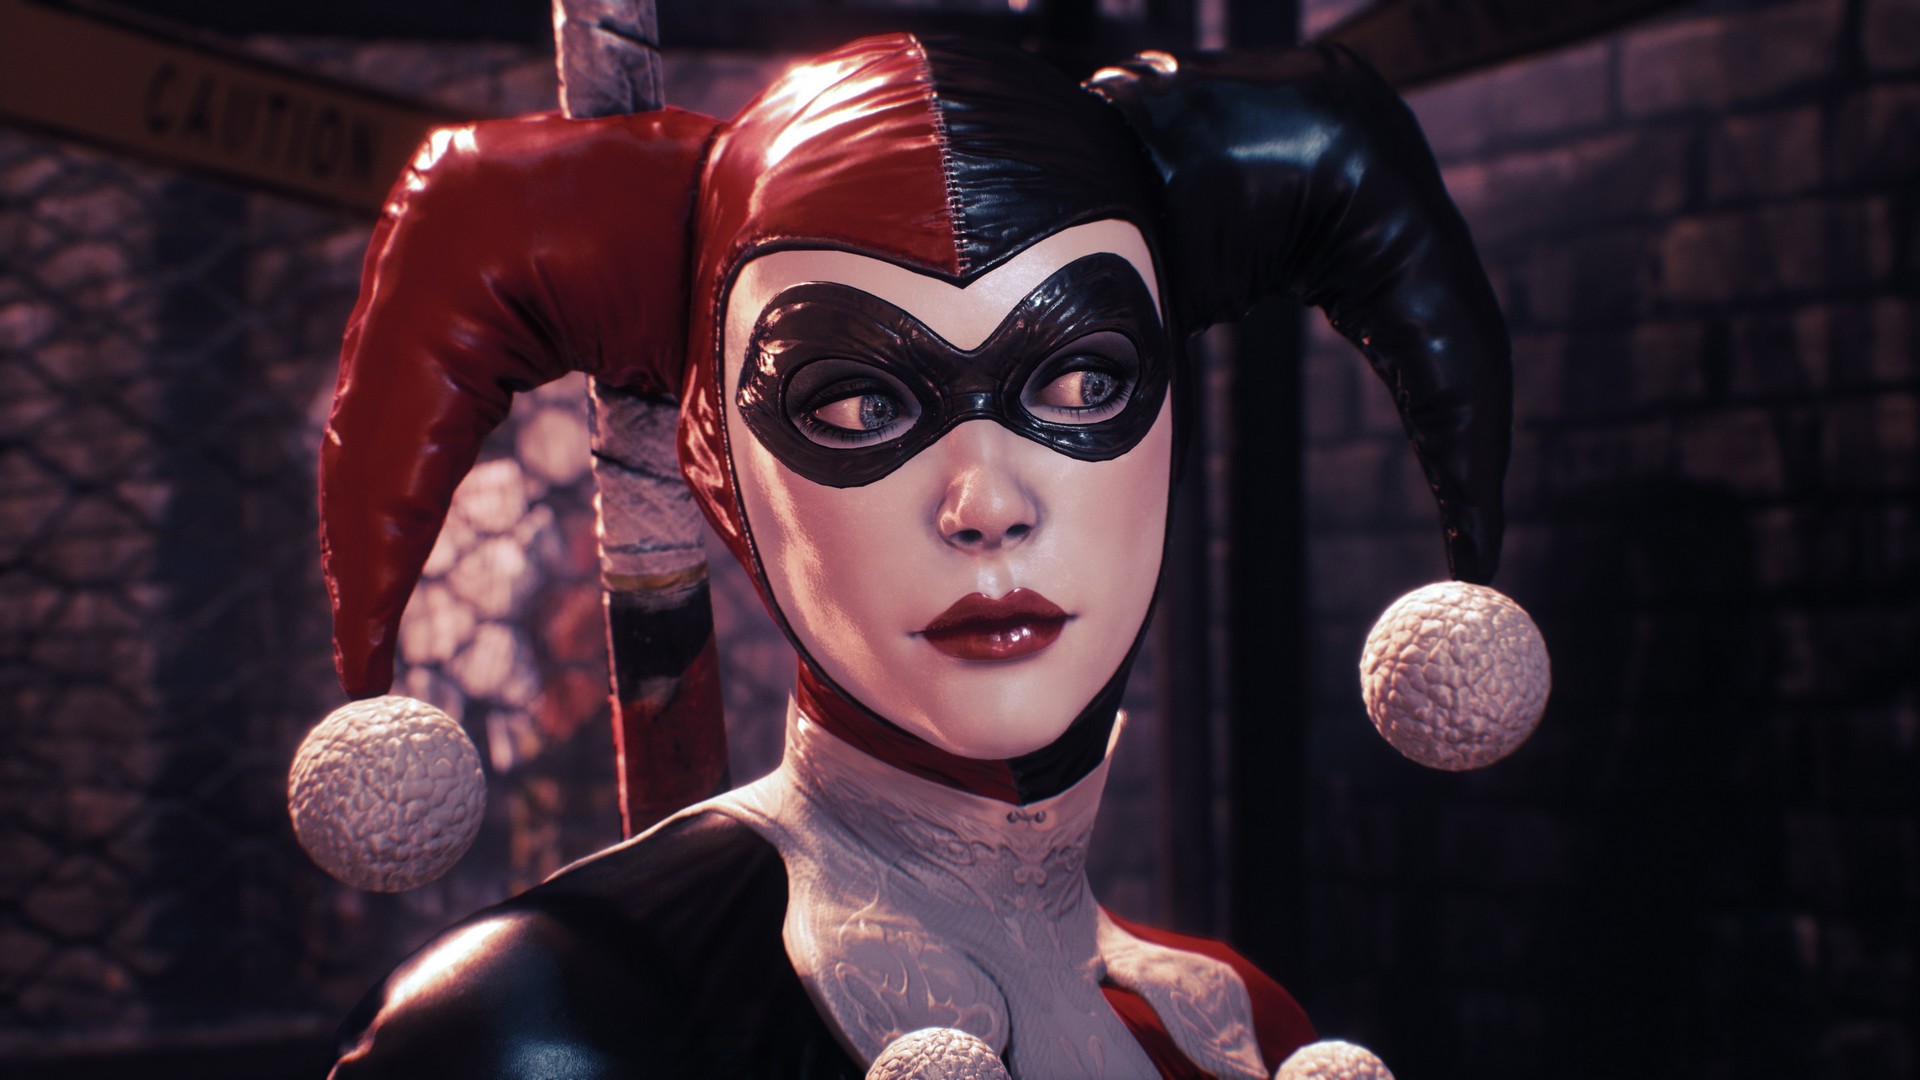 Harley Quinn Costume HD Backgrounds With Resolution 1920X1080 pixel. You can make this wallpaper for your Desktop Computer Backgrounds, Mac Wallpapers, Android Lock screen or iPhone Screensavers